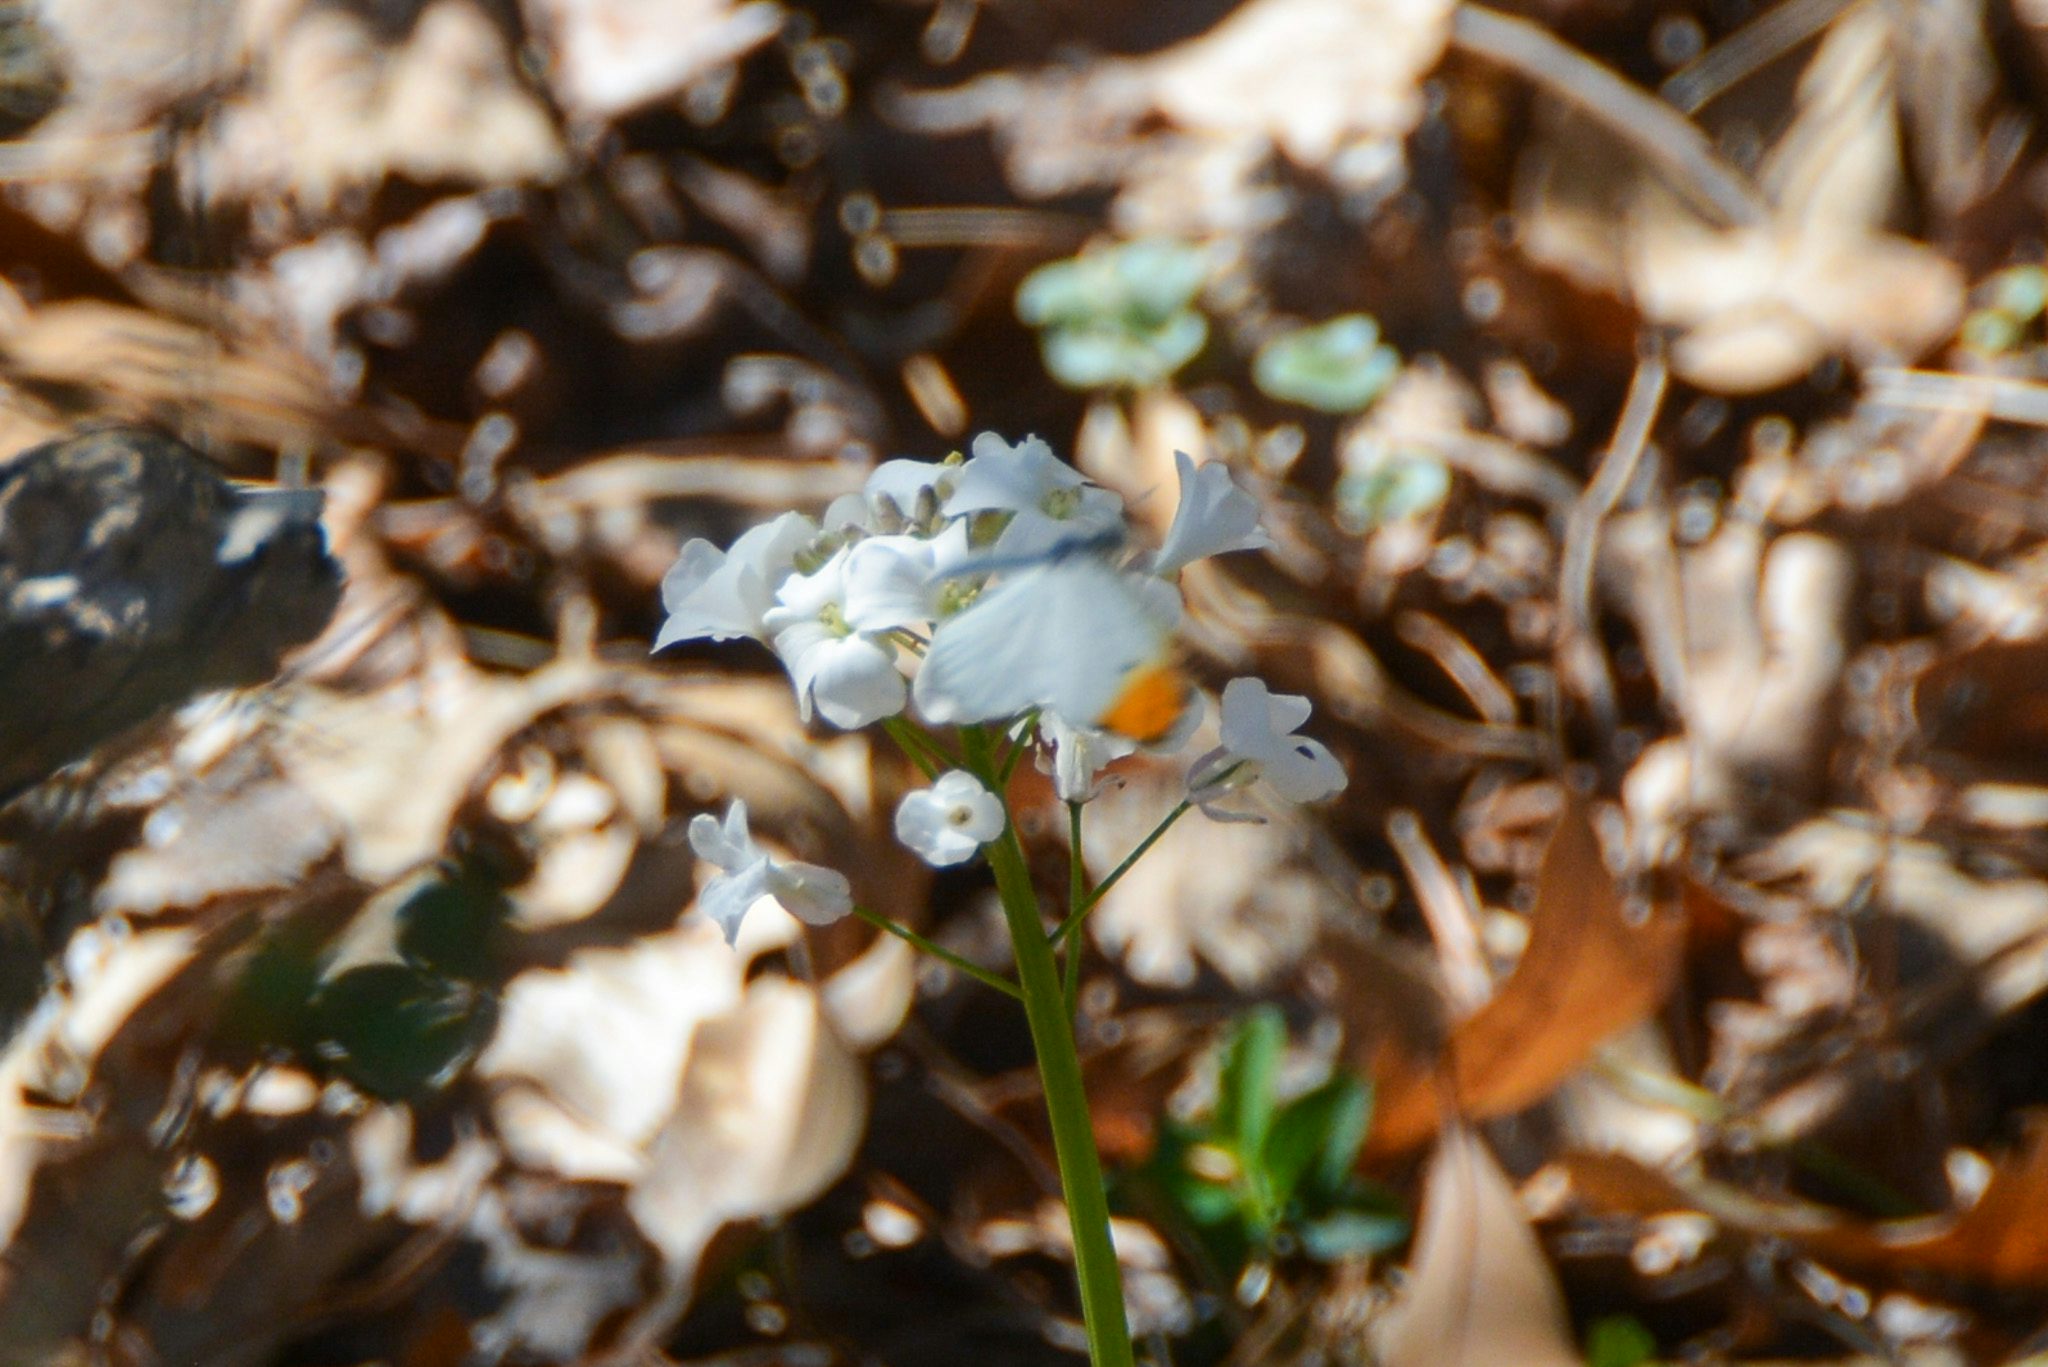 A photo of a cluster of white flowers, with a small white butterfly with orange tips on its wings flying in front of it, captured blurrily